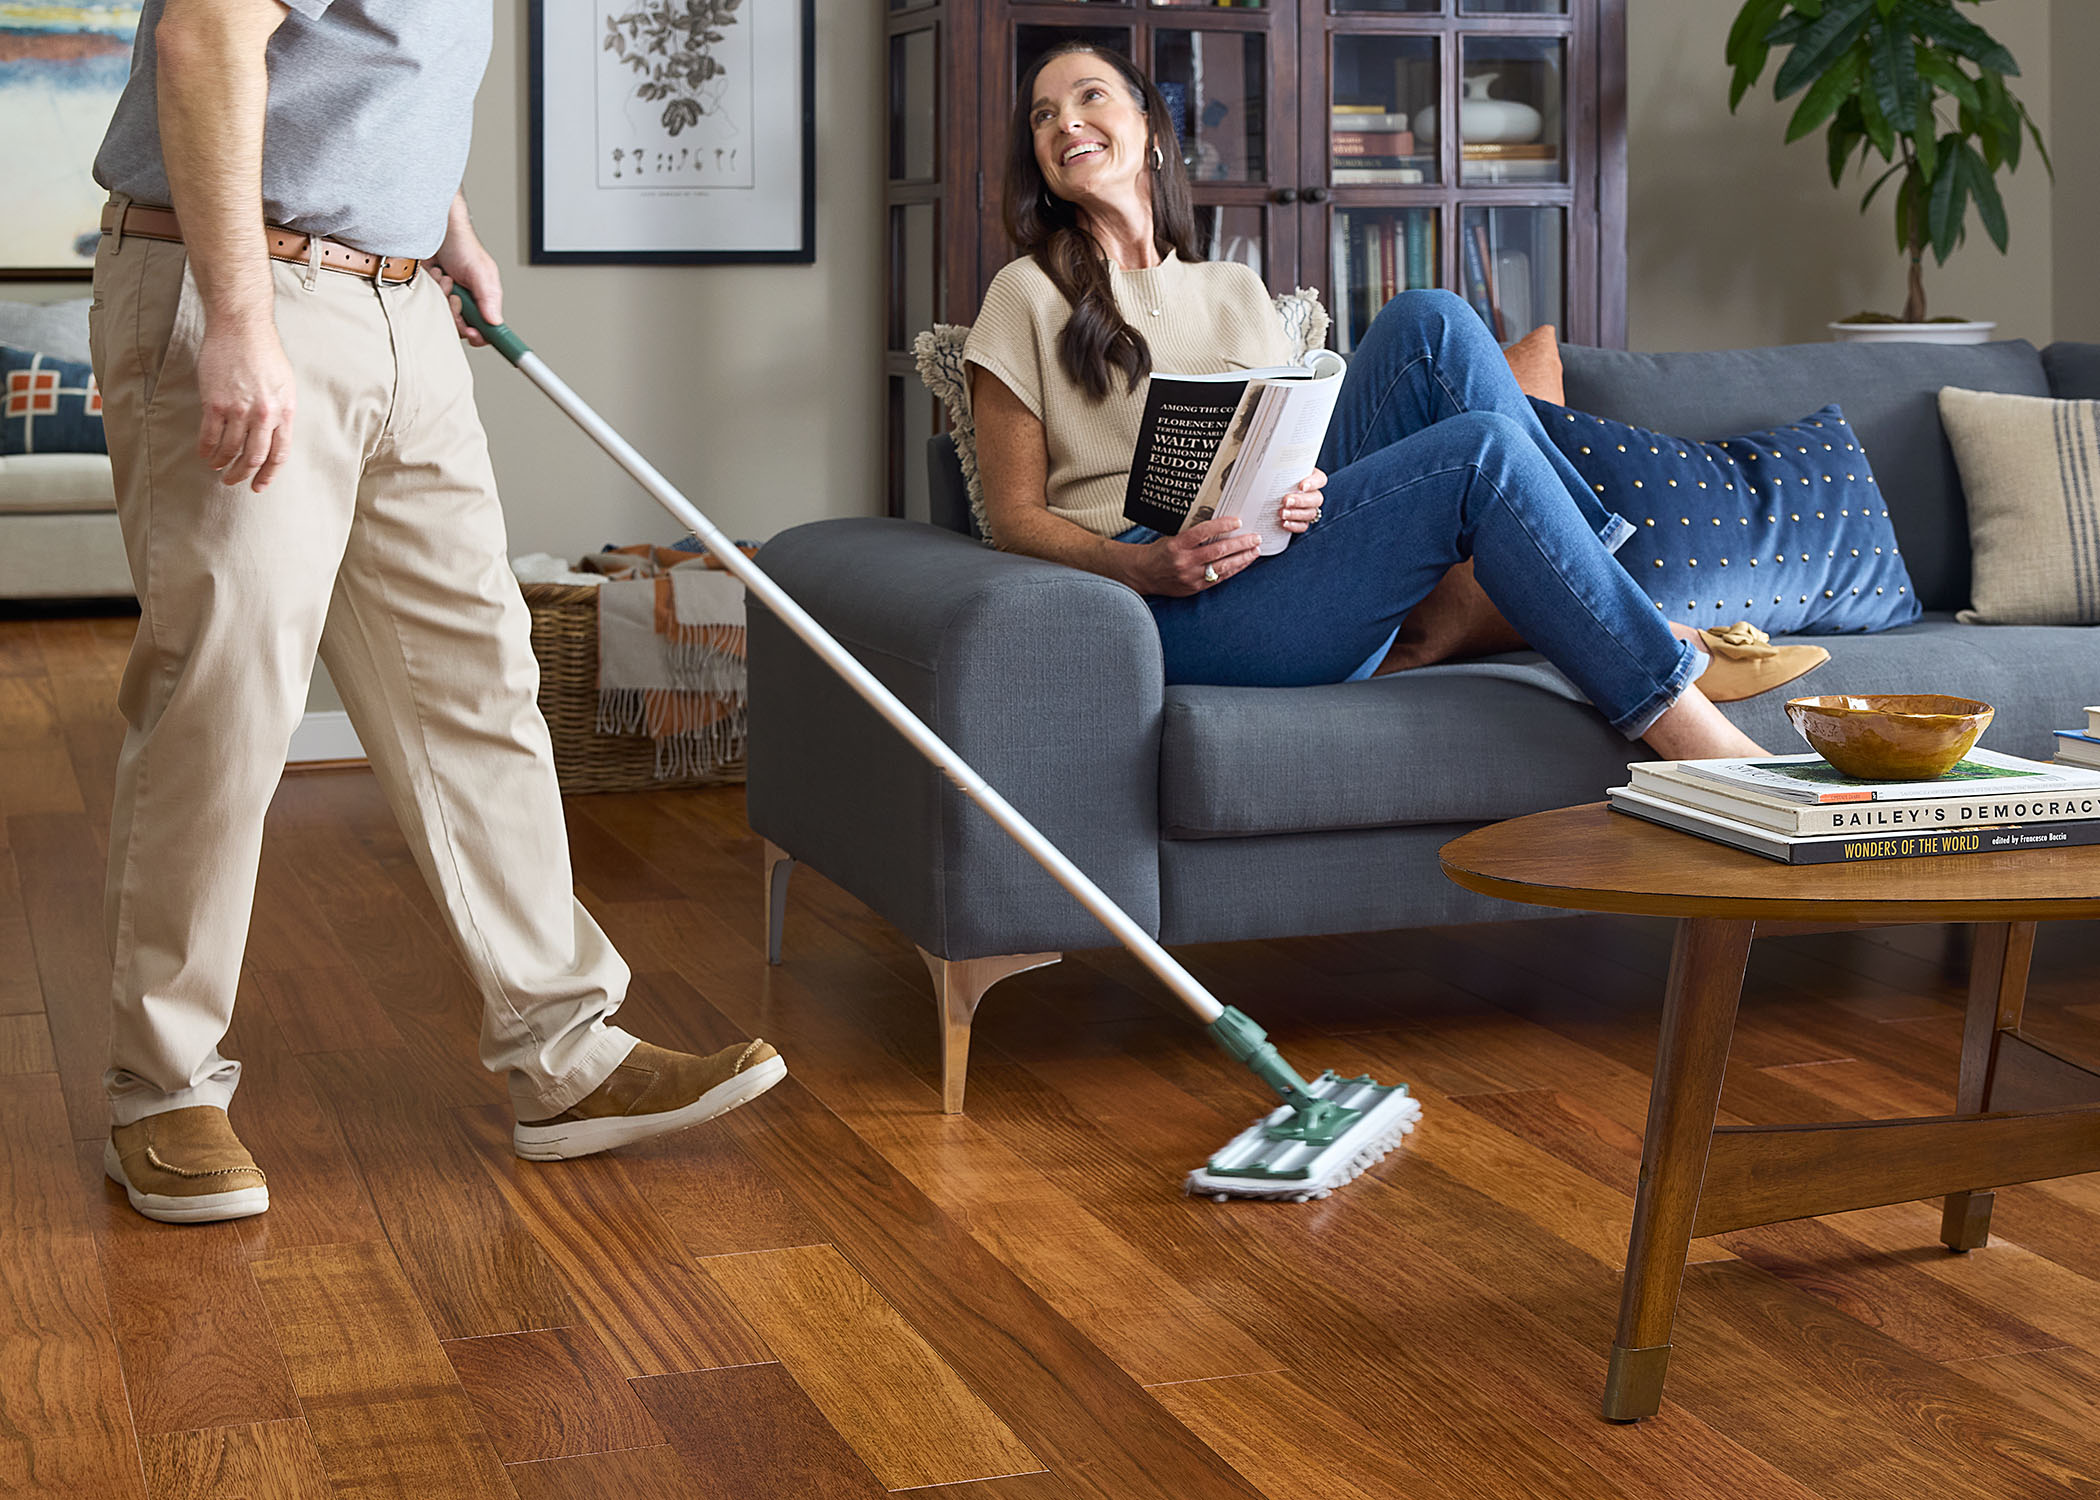 person cleaning reddish brown solid hardwood floor while woman laughing lifts her feet while sitting on a dark gray sofa reading a magazine